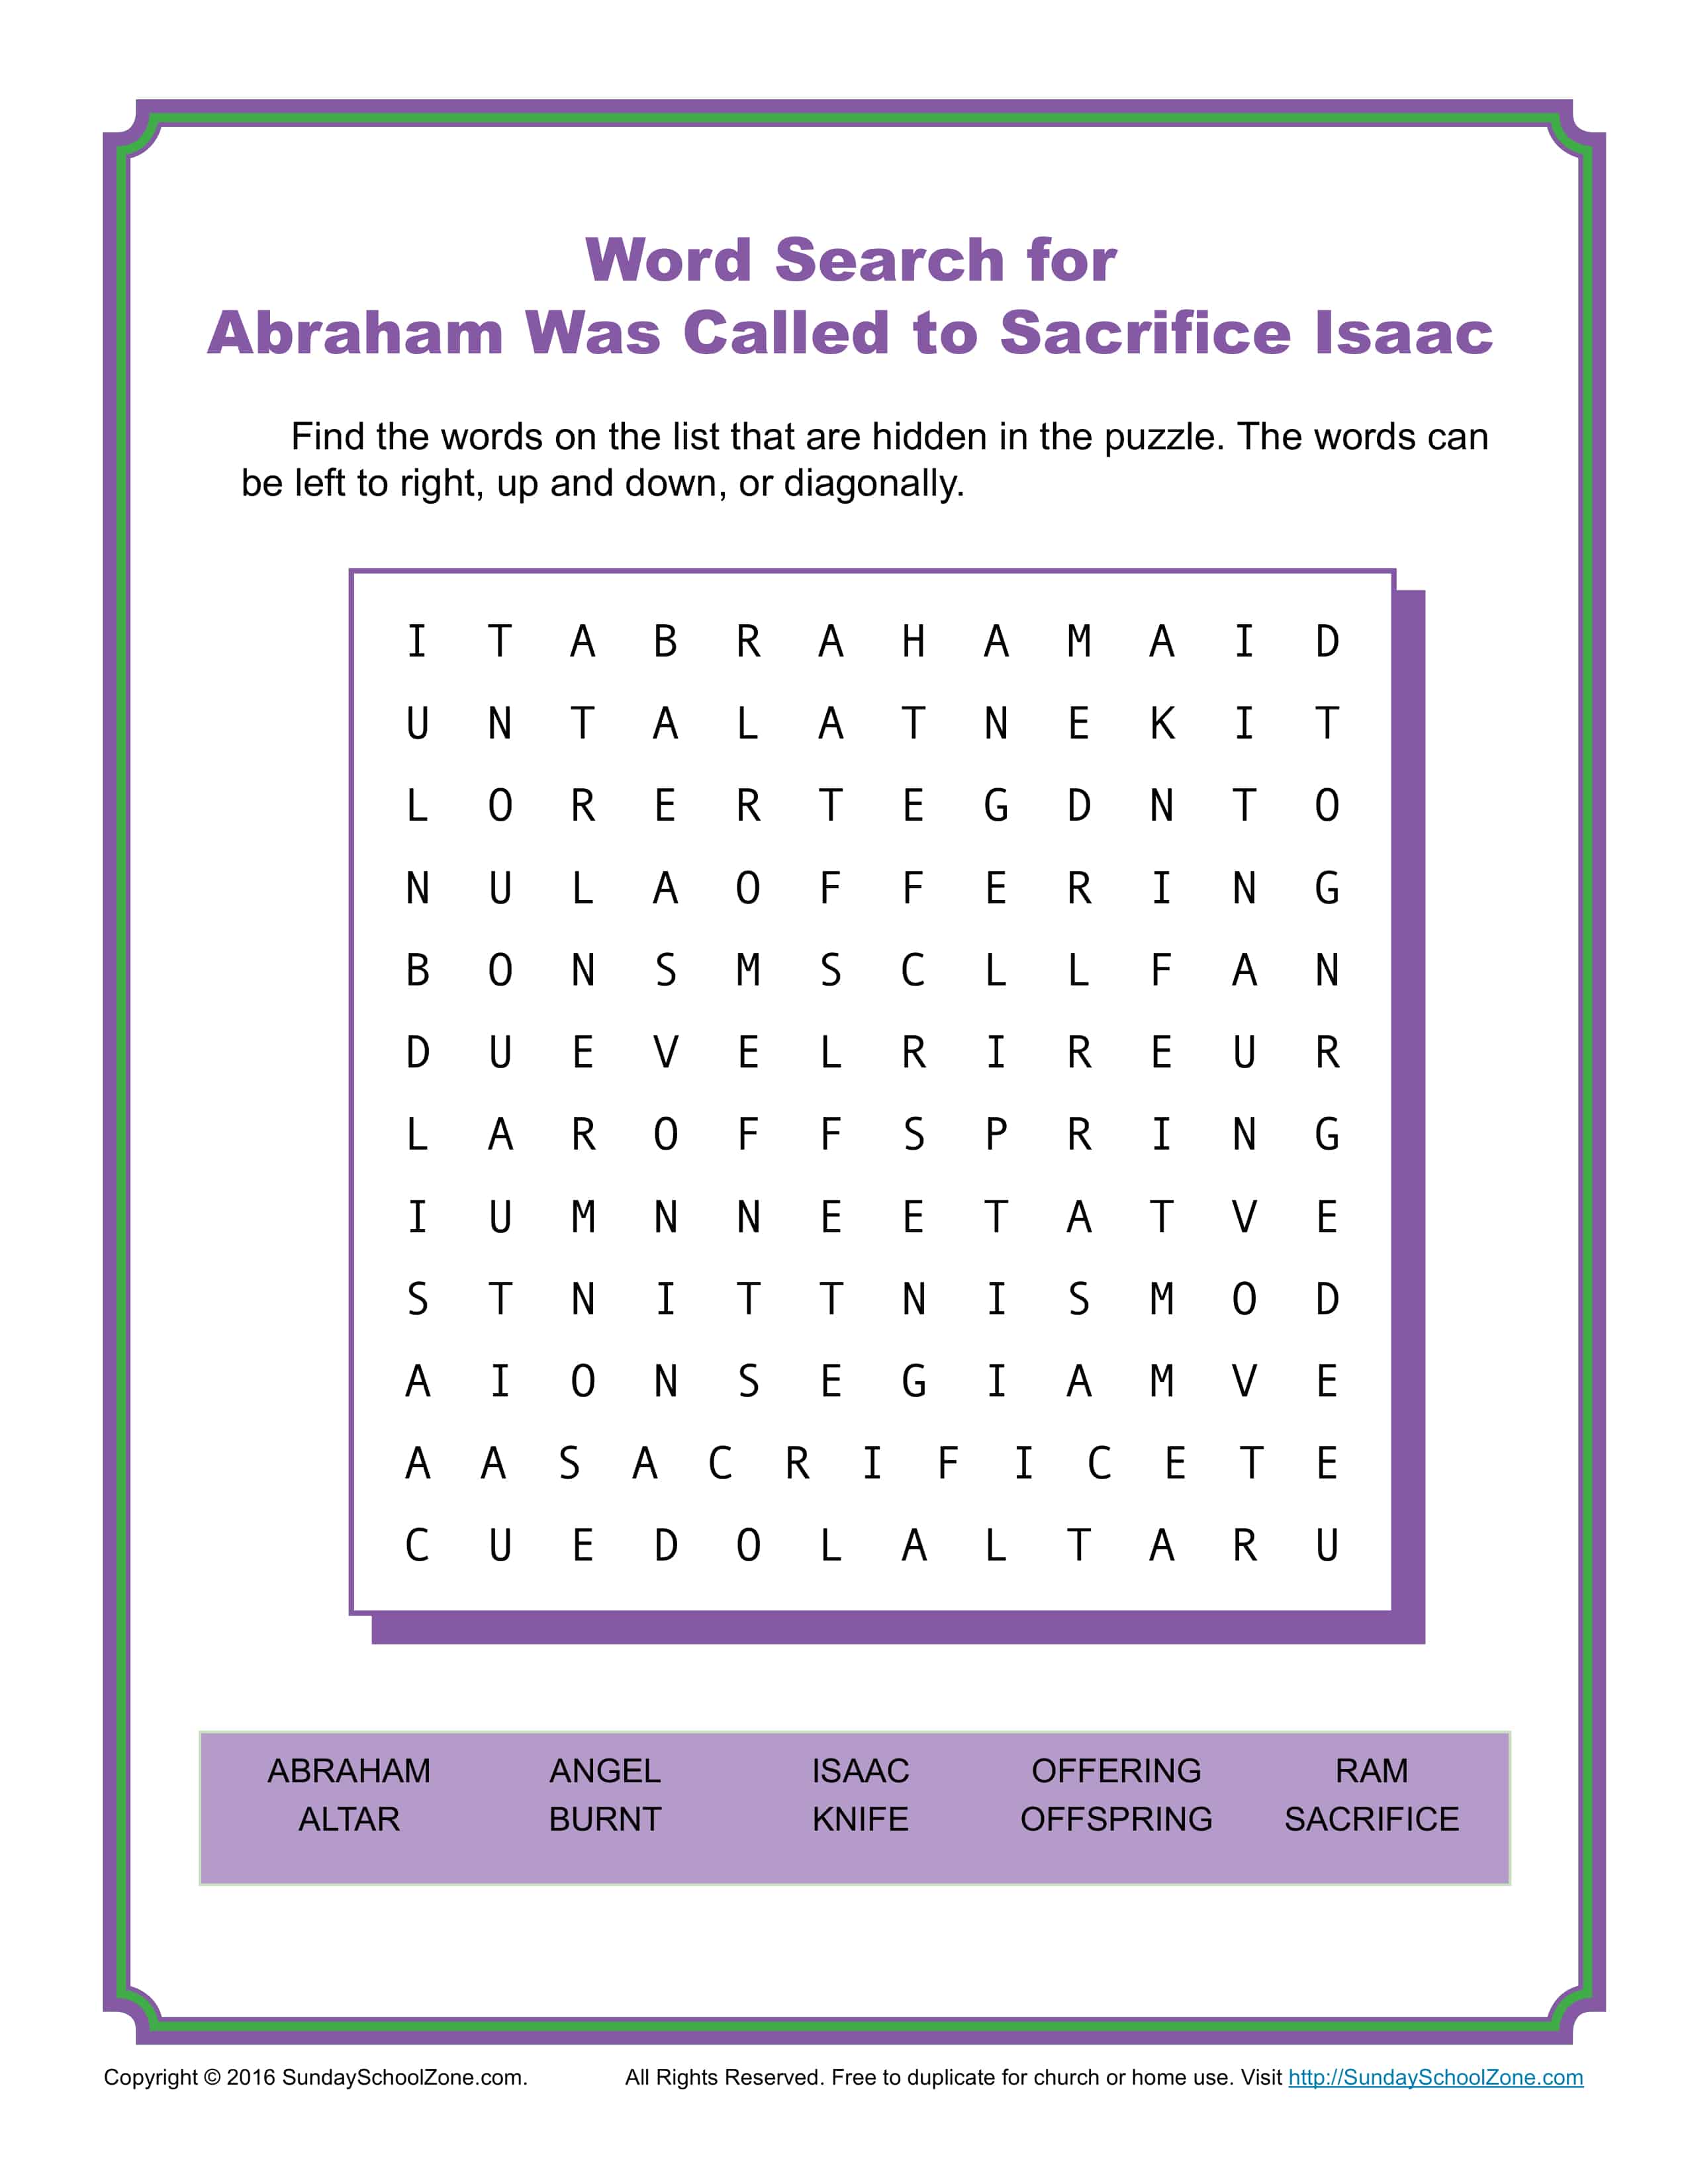 abraham was called to sacrifice isaac word search